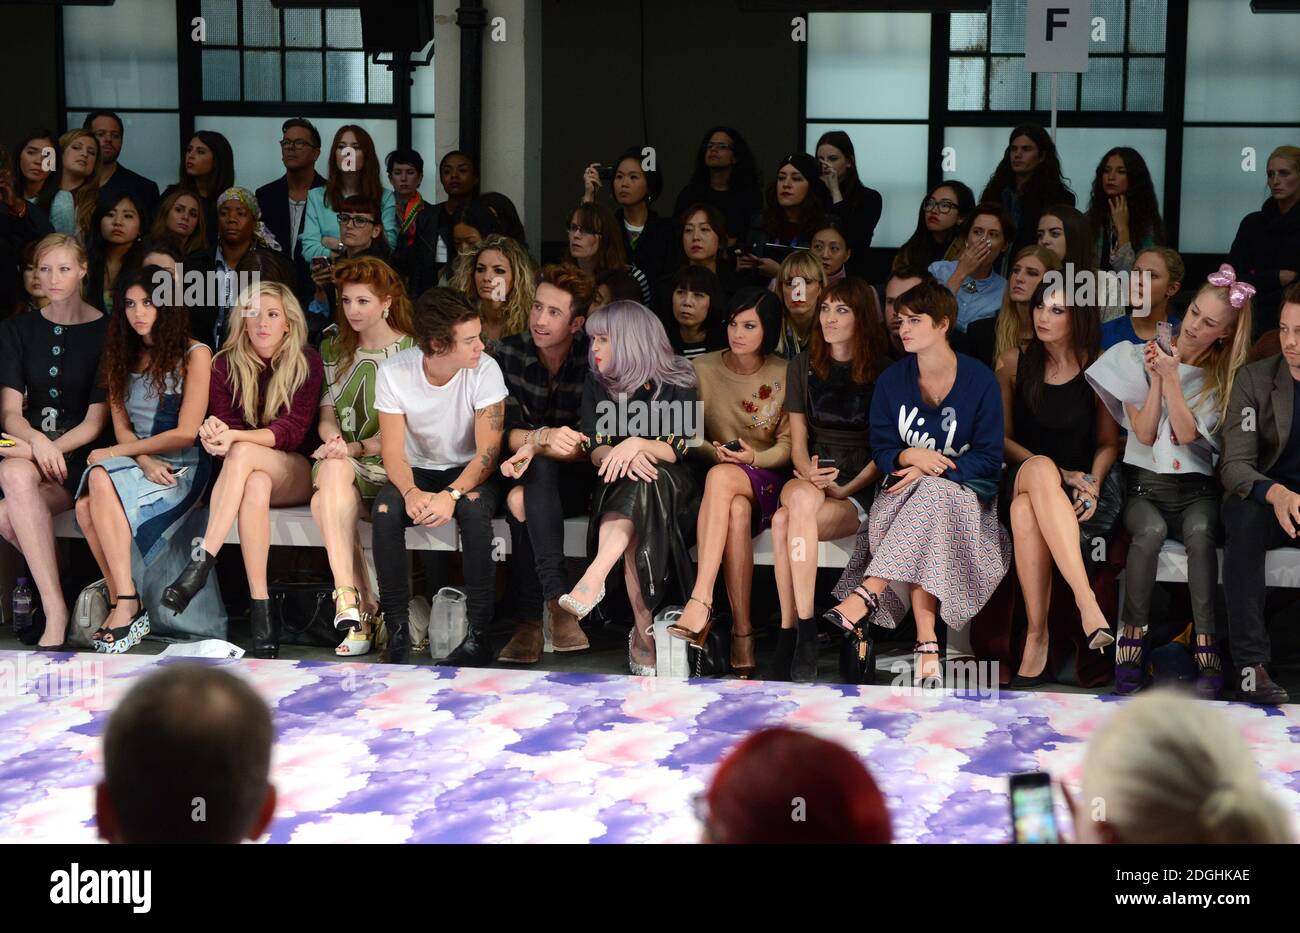 (Left to Right) Eliza Doolittle, Ellie Goulding, Nicola Roberts, Harry Styles, Nick Grimshaw, Kelly Osbourne, Leigh Lezark, Alexa Chung, Pixie Geldof and Daisy Lowe at the House of Holland Catwalk Show Catwalk Show, part of London Fashion Week, Spring Summer 2014, Goldsmiths Hall. Stock Photo